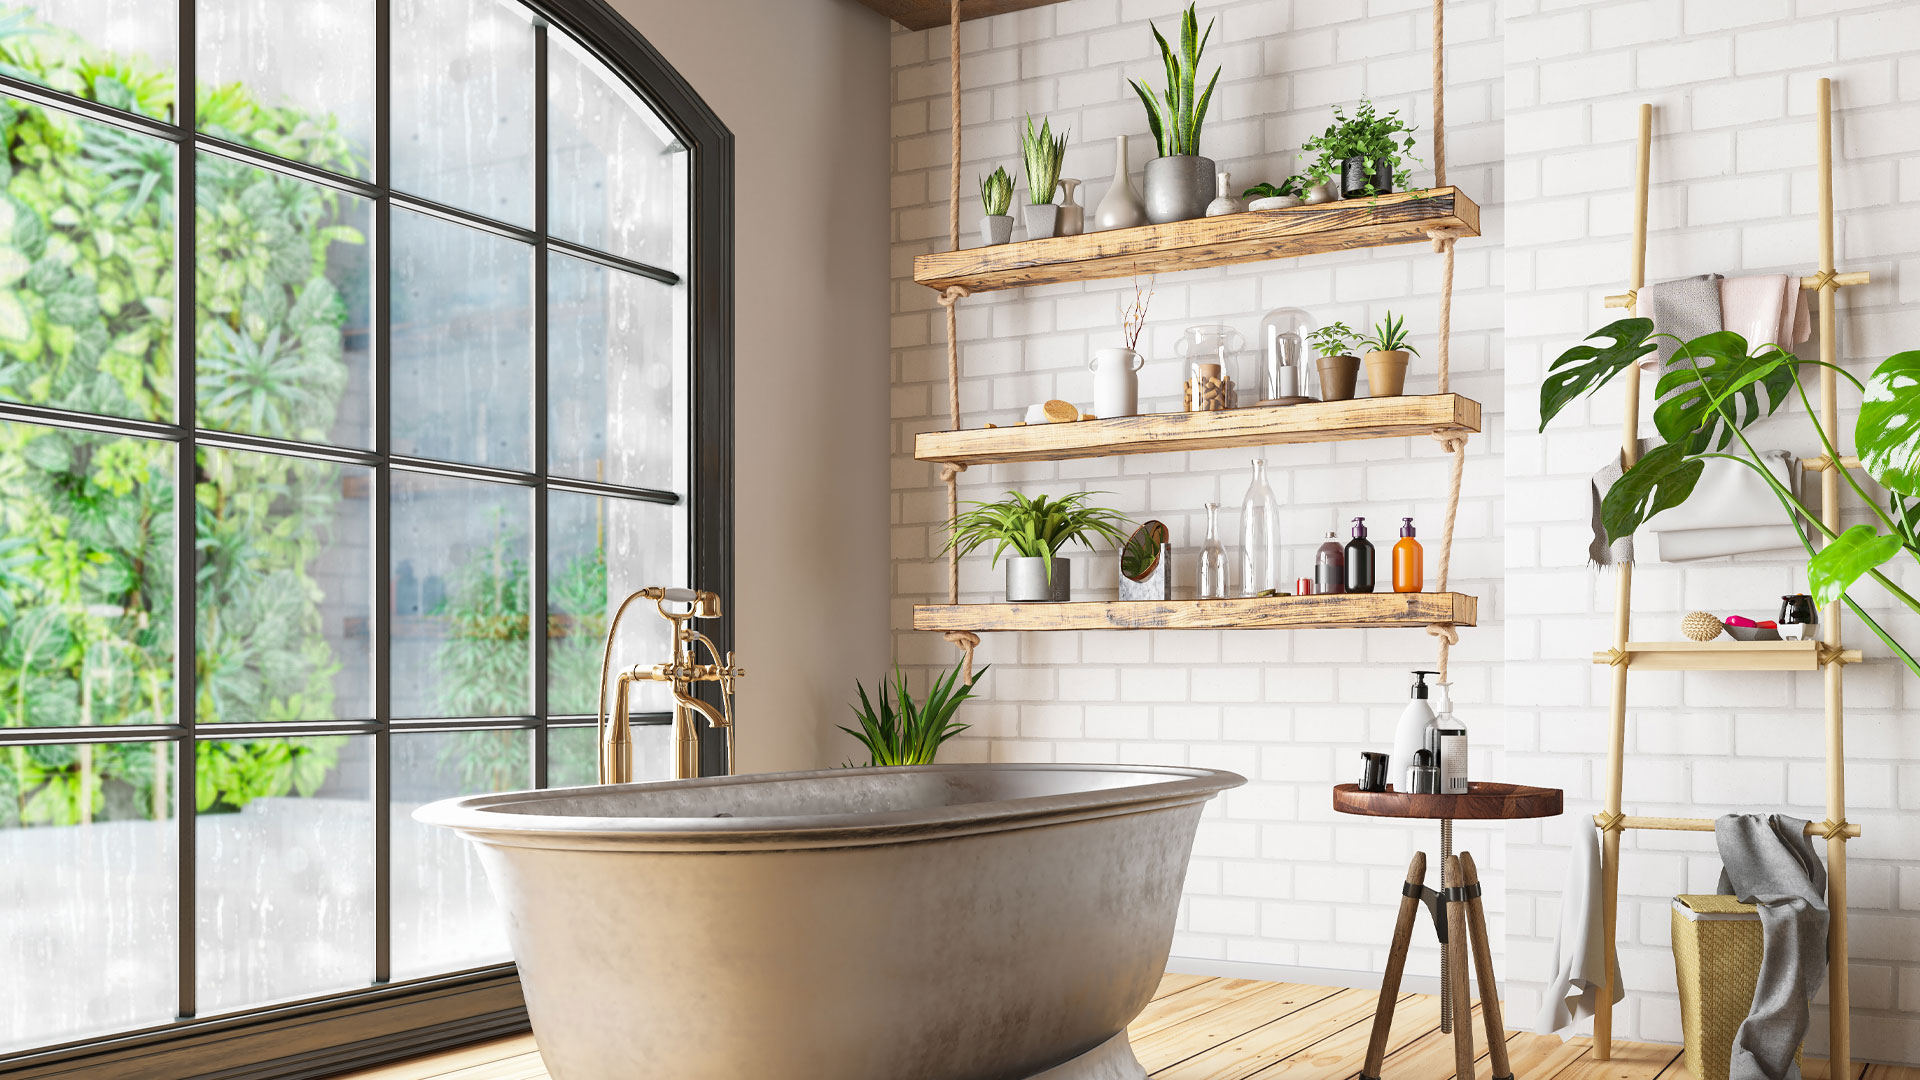 Humidity-loving plants that are best for growing in your bathroom – including a kind you can use to soothe your skin [Video]